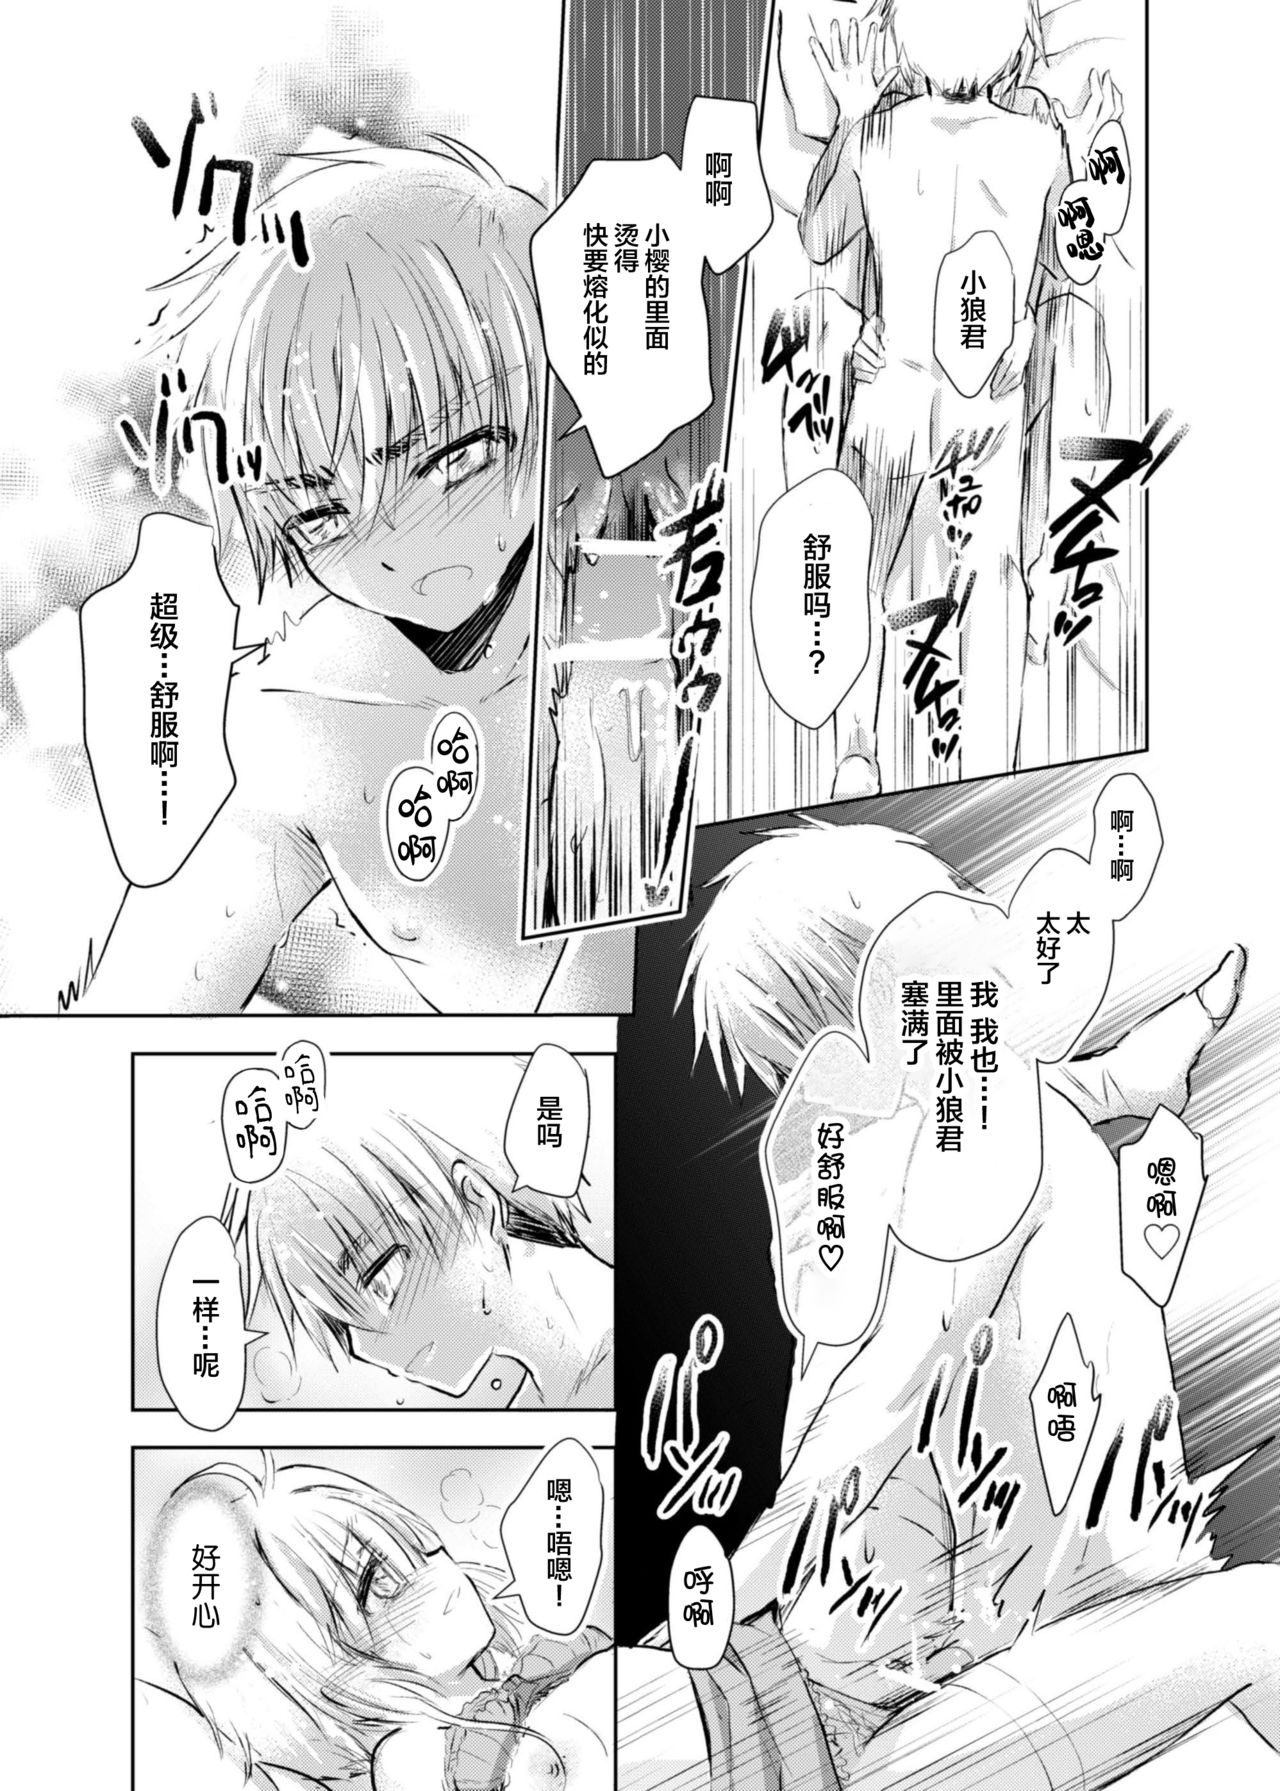 [Maple of Forest (Kaede Sago)] Give and Take (Cardcaptor Sakura) [Chinese] [新桥月白日语社] [Digital] page 32 full